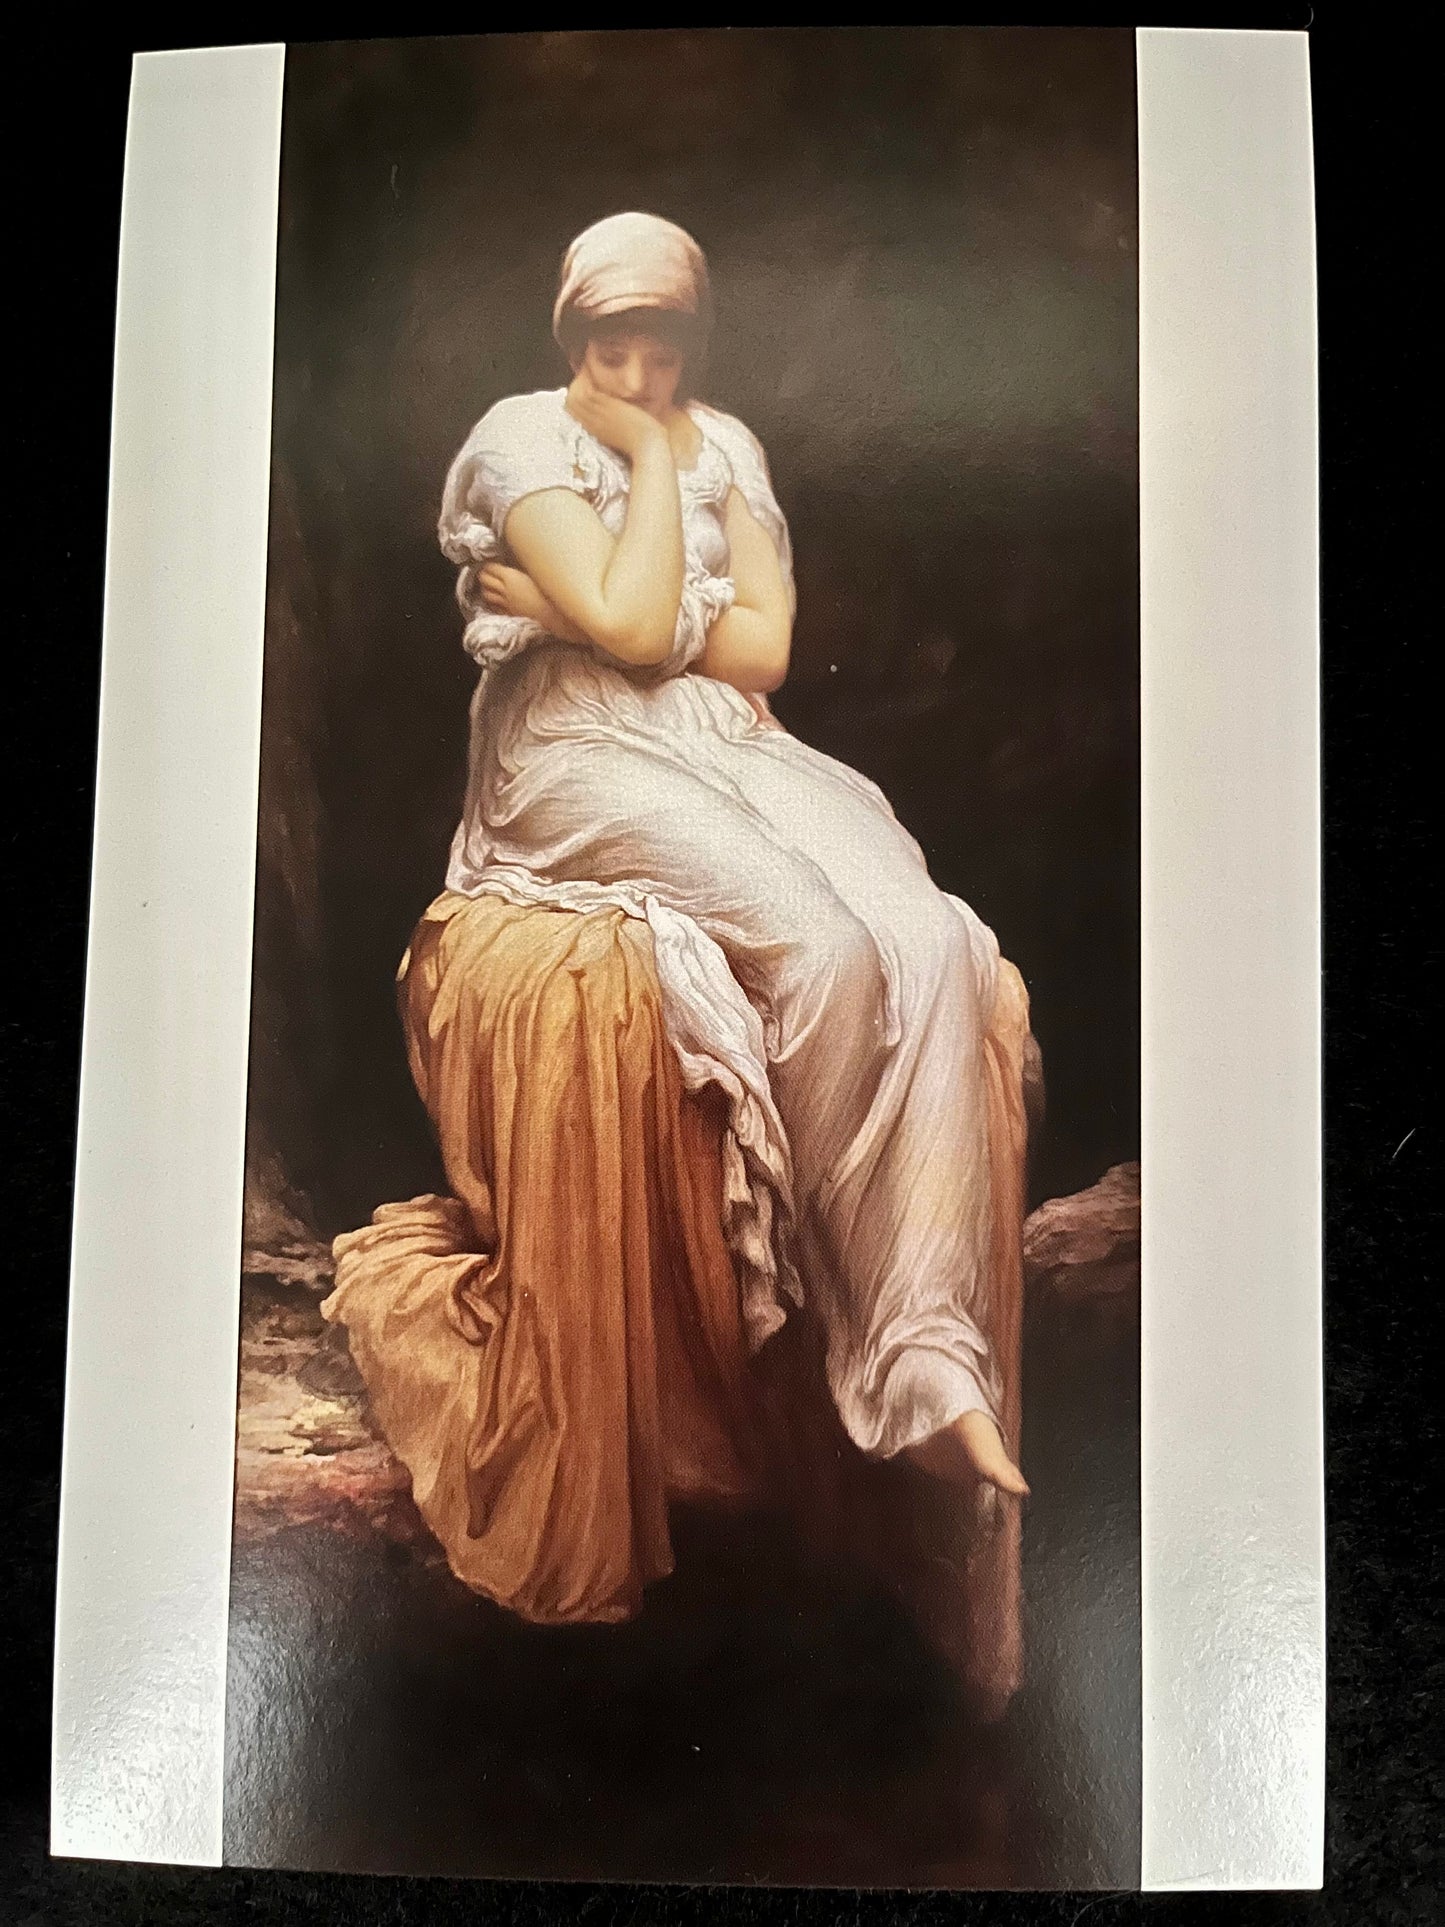 "Solitude" by Leighton Post Card